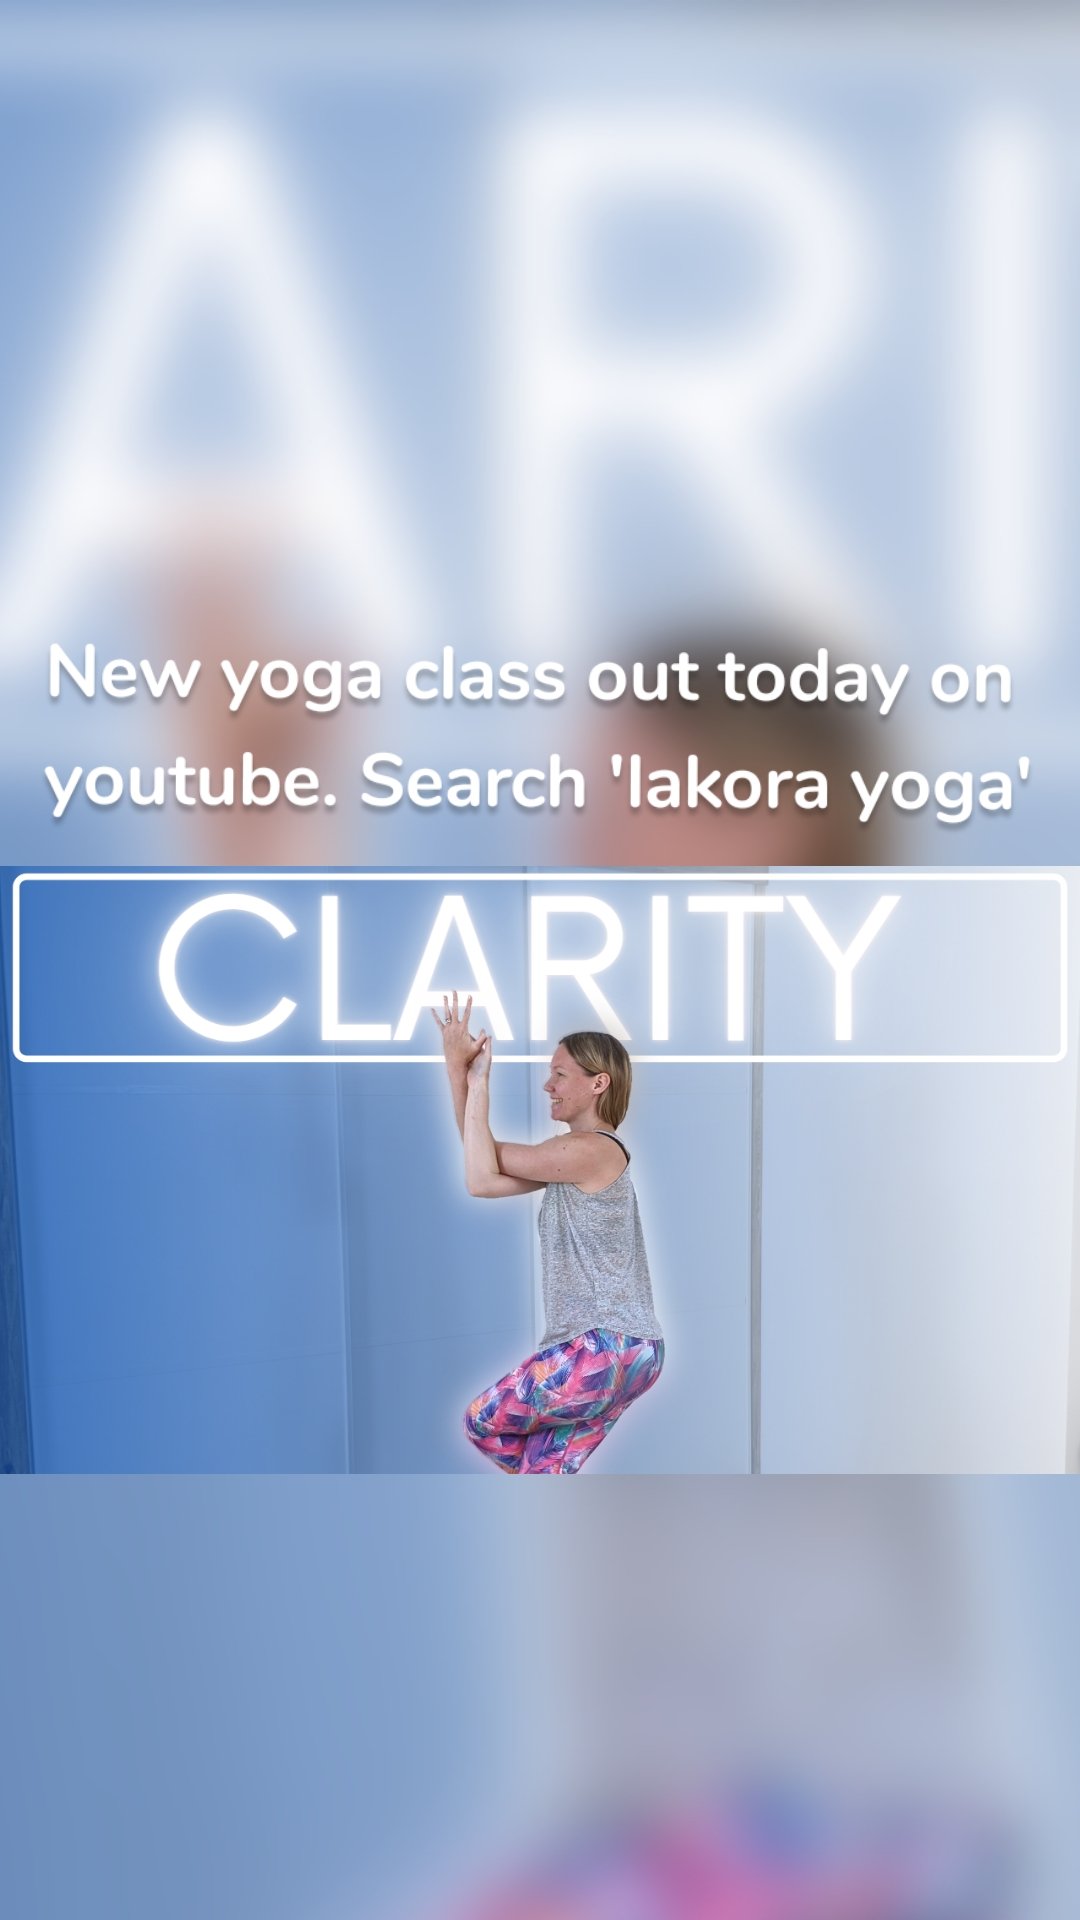 New yoga class out today on youtube. Search 'lakora yoga'